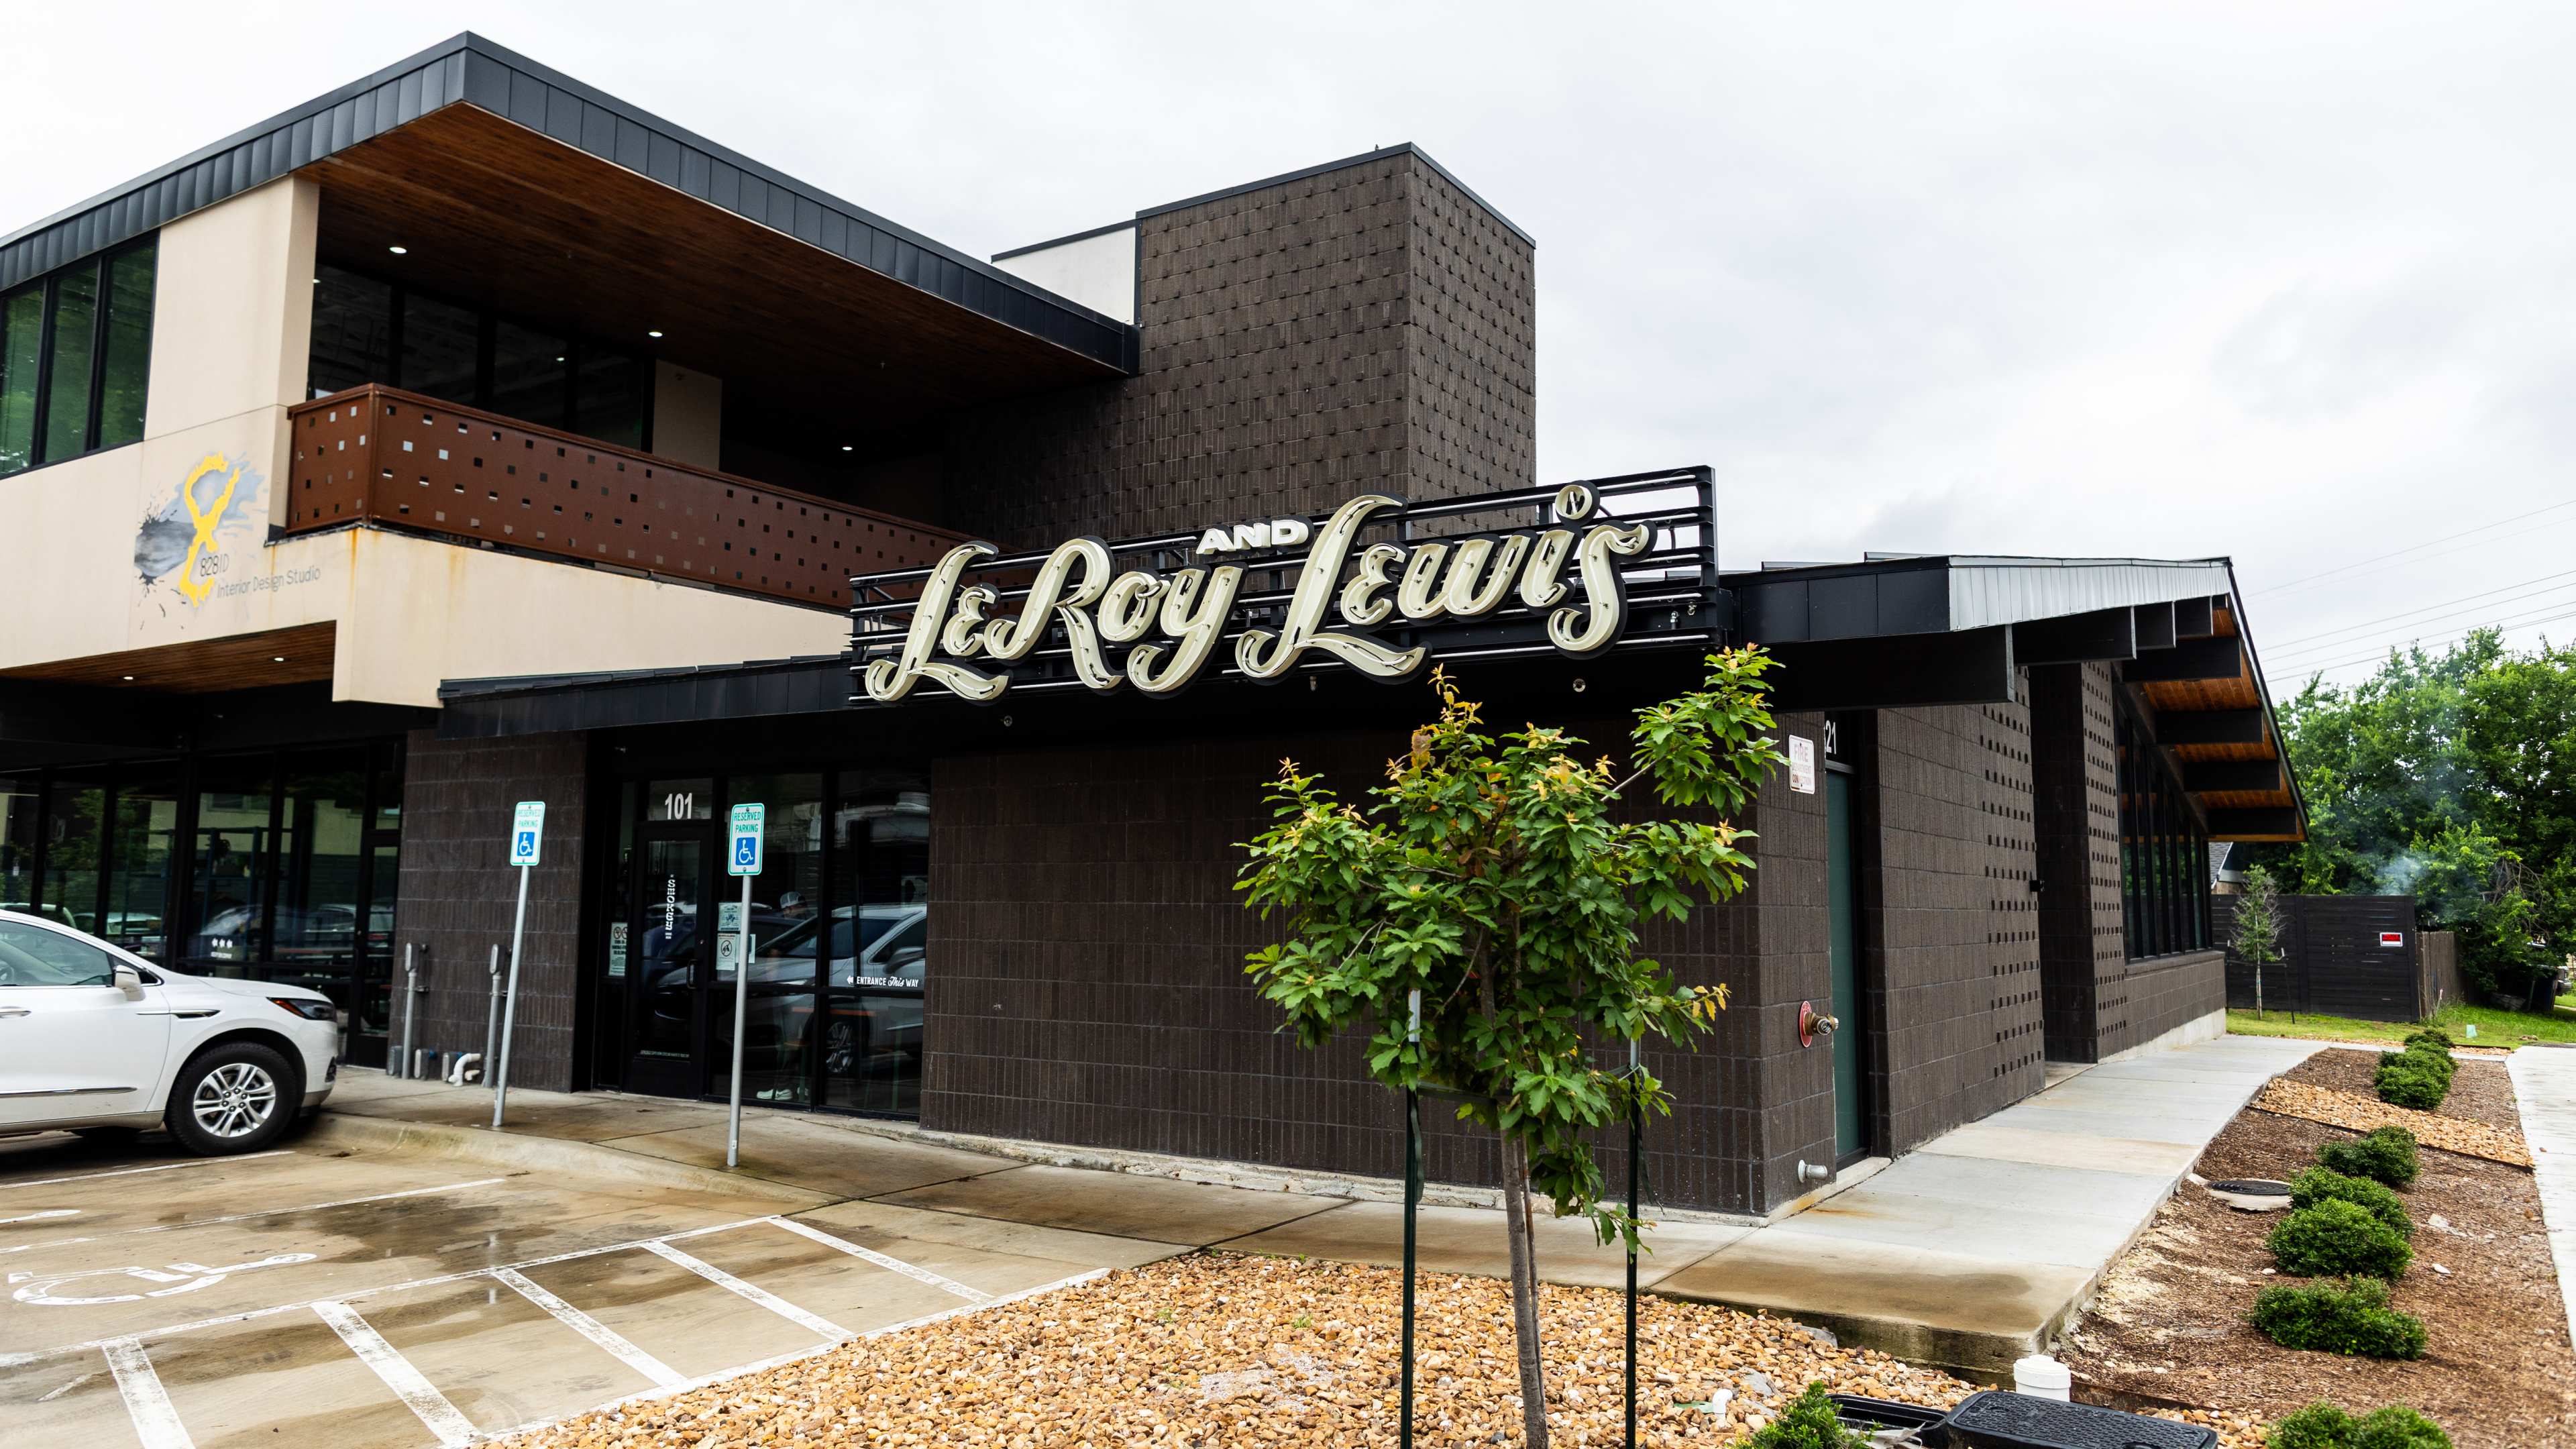 the outside of Leroy and lewis barbecue